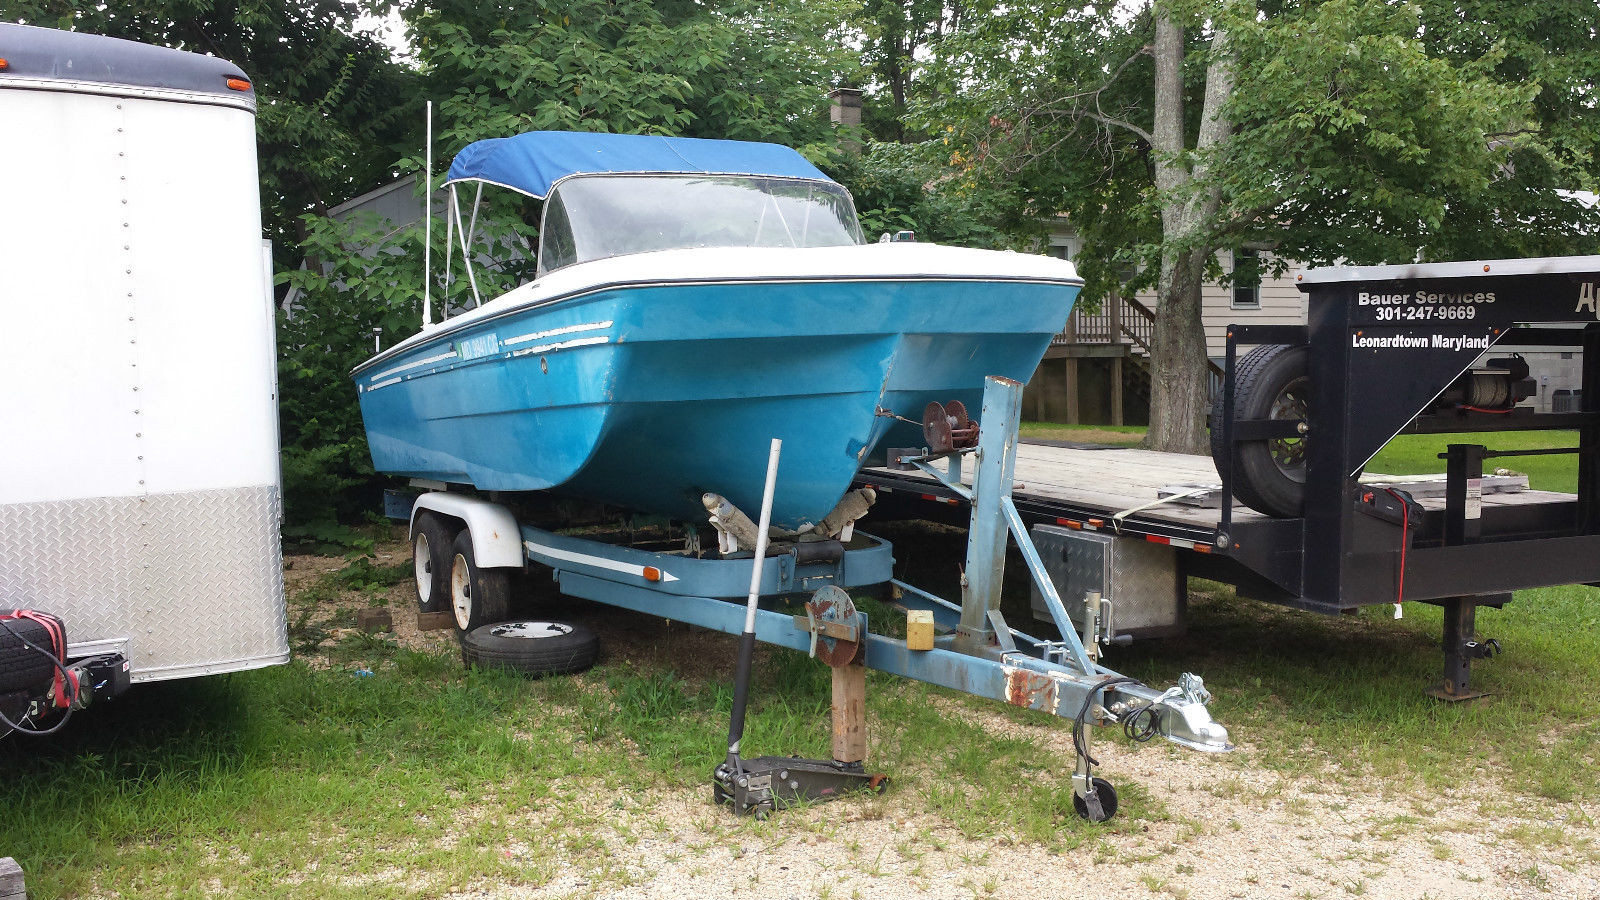 Thunderbird 18 Foot Boat And H/d Trailer